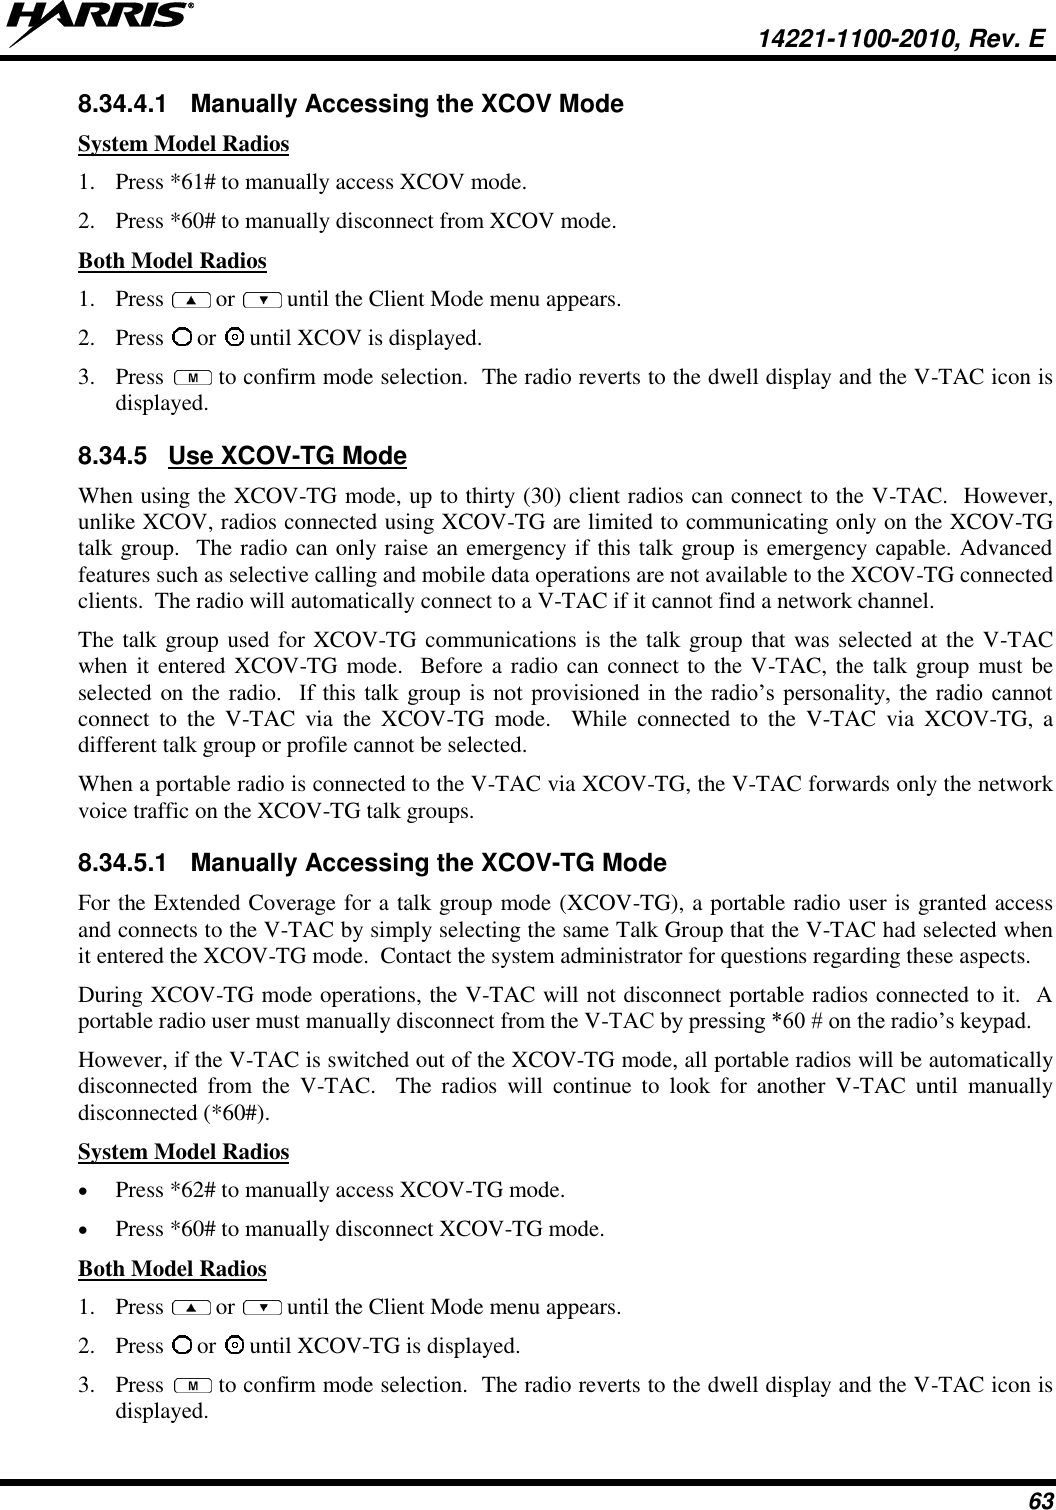   14221-1100-2010, Rev. E 63 8.34.4.1  Manually Accessing the XCOV Mode System Model Radios 1. Press *61# to manually access XCOV mode.  2. Press *60# to manually disconnect from XCOV mode.  Both Model Radios 1. Press   or   until the Client Mode menu appears. 2. Press   or   until XCOV is displayed. 3. Press   to confirm mode selection.  The radio reverts to the dwell display and the V-TAC icon is displayed. 8.34.5  Use XCOV-TG Mode  When using the XCOV-TG mode, up to thirty (30) client radios can connect to the V-TAC.  However, unlike XCOV, radios connected using XCOV-TG are limited to communicating only on the XCOV-TG talk group.  The radio can only raise an emergency if this talk group is emergency capable. Advanced features such as selective calling and mobile data operations are not available to the XCOV-TG connected clients.  The radio will automatically connect to a V-TAC if it cannot find a network channel. The talk group used for XCOV-TG communications is the talk group that was selected at the V-TAC when it entered XCOV-TG mode.  Before a radio can connect to the V-TAC, the talk group must be selected on the radio.    If  this  talk  group  is  not  provisioned  in  the  radio’s personality,  the  radio  cannot connect  to  the  V-TAC  via  the  XCOV-TG  mode.    While  connected  to  the  V-TAC  via  XCOV-TG,  a different talk group or profile cannot be selected.  When a portable radio is connected to the V-TAC via XCOV-TG, the V-TAC forwards only the network voice traffic on the XCOV-TG talk groups.   8.34.5.1  Manually Accessing the XCOV-TG Mode For the Extended Coverage for a talk group mode (XCOV-TG), a portable radio user is granted access and connects to the V-TAC by simply selecting the same Talk Group that the V-TAC had selected when it entered the XCOV-TG mode.  Contact the system administrator for questions regarding these aspects. During XCOV-TG mode operations, the V-TAC will not disconnect portable radios connected to it.  A portable radio user must manually disconnect from the V-TAC by pressing *60 # on the radio’s keypad.  However, if the V-TAC is switched out of the XCOV-TG mode, all portable radios will be automatically disconnected  from  the  V-TAC.    The  radios  will  continue  to  look  for  another  V-TAC  until  manually disconnected (*60#).  System Model Radios  Press *62# to manually access XCOV-TG mode.   Press *60# to manually disconnect XCOV-TG mode. Both Model Radios 1. Press   or   until the Client Mode menu appears. 2. Press   or   until XCOV-TG is displayed. 3. Press   to confirm mode selection.  The radio reverts to the dwell display and the V-TAC icon is displayed. 